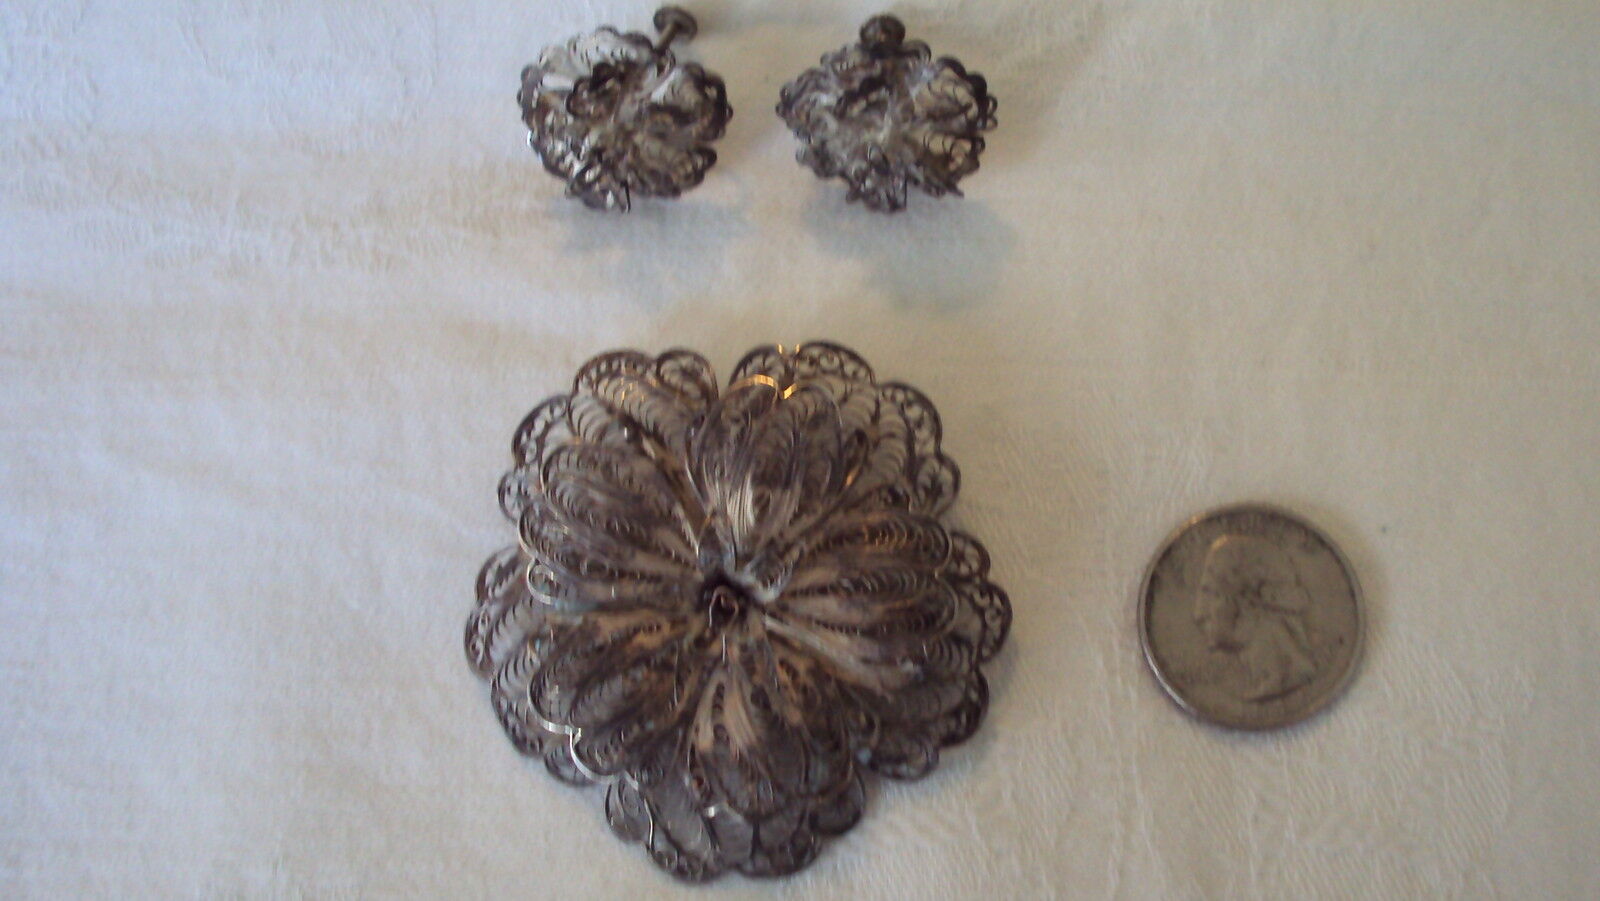 VINTAGE STERLING SPANISH LACE FILIGREE HAND MADE FLOWER LARGE PIN BROOCH Earring